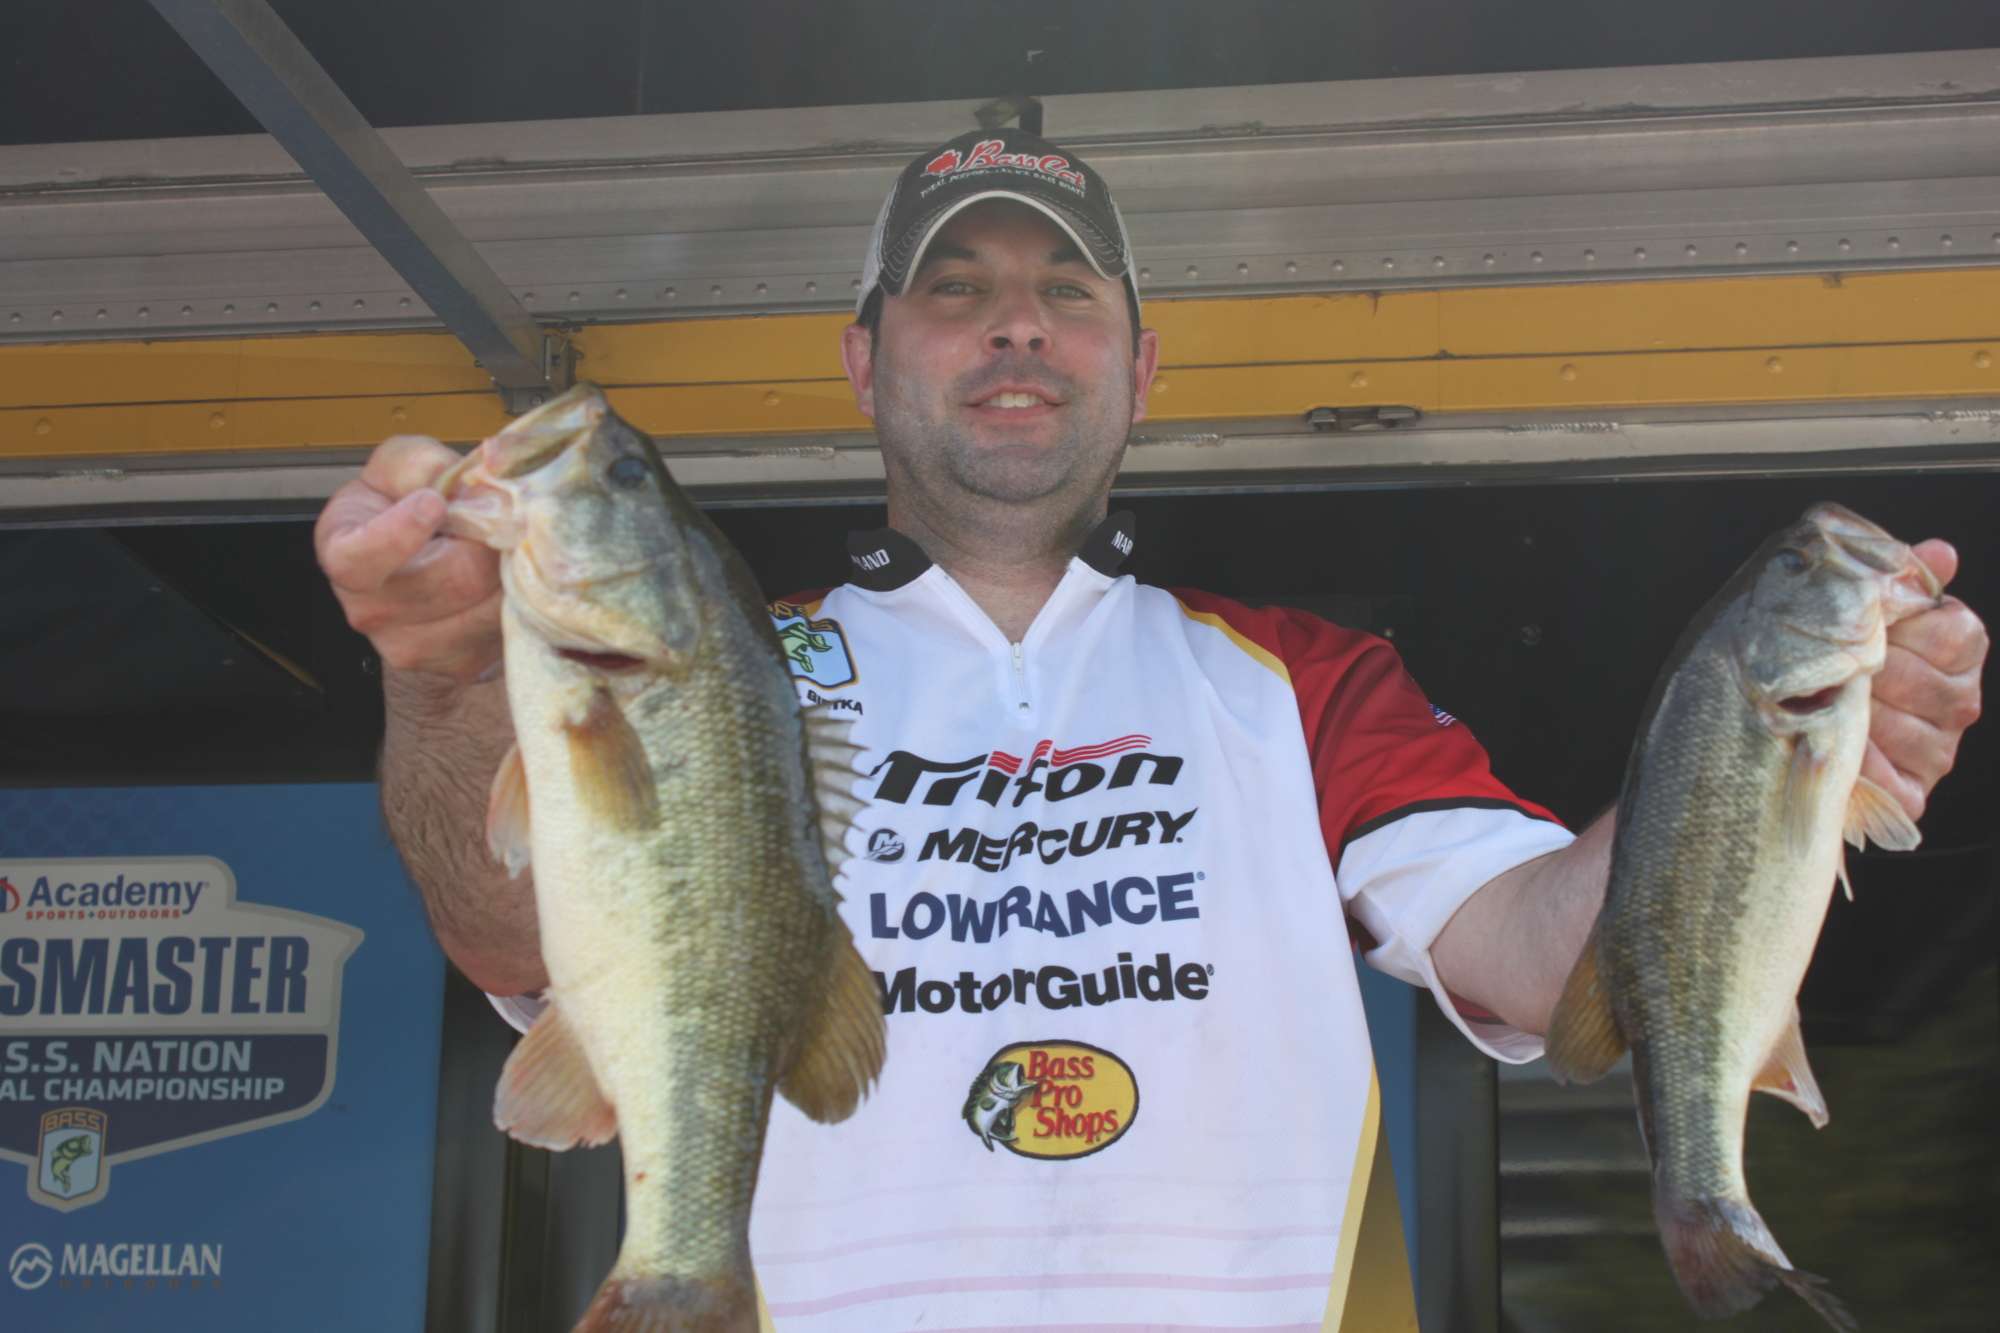 Paul Gietka of Maryland is in sixth place among boaters with 17-12.